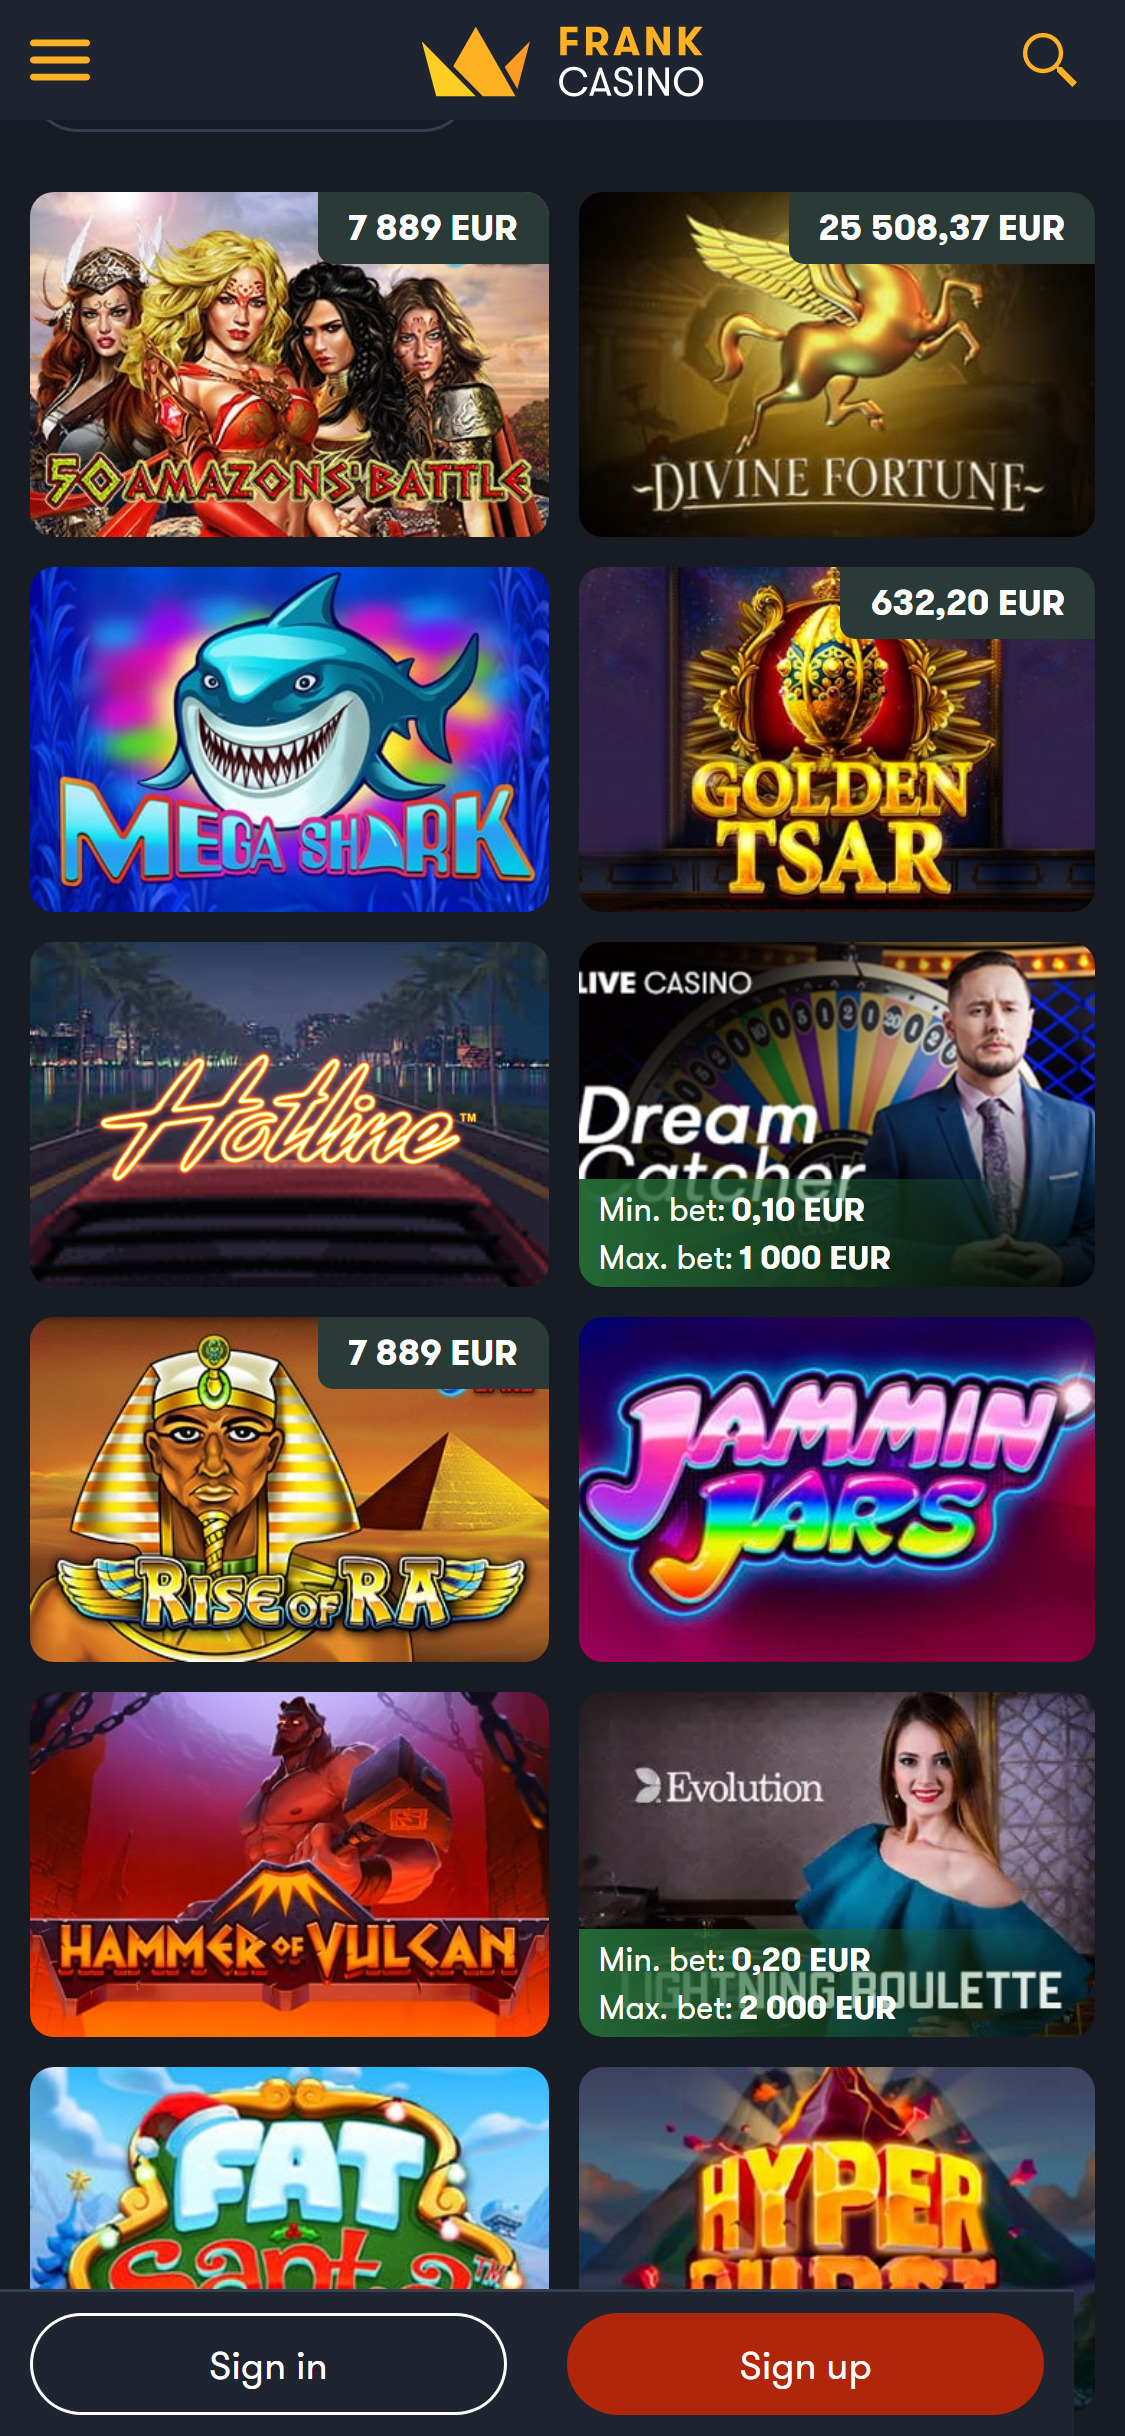 Frank Casino Mobile Games Review